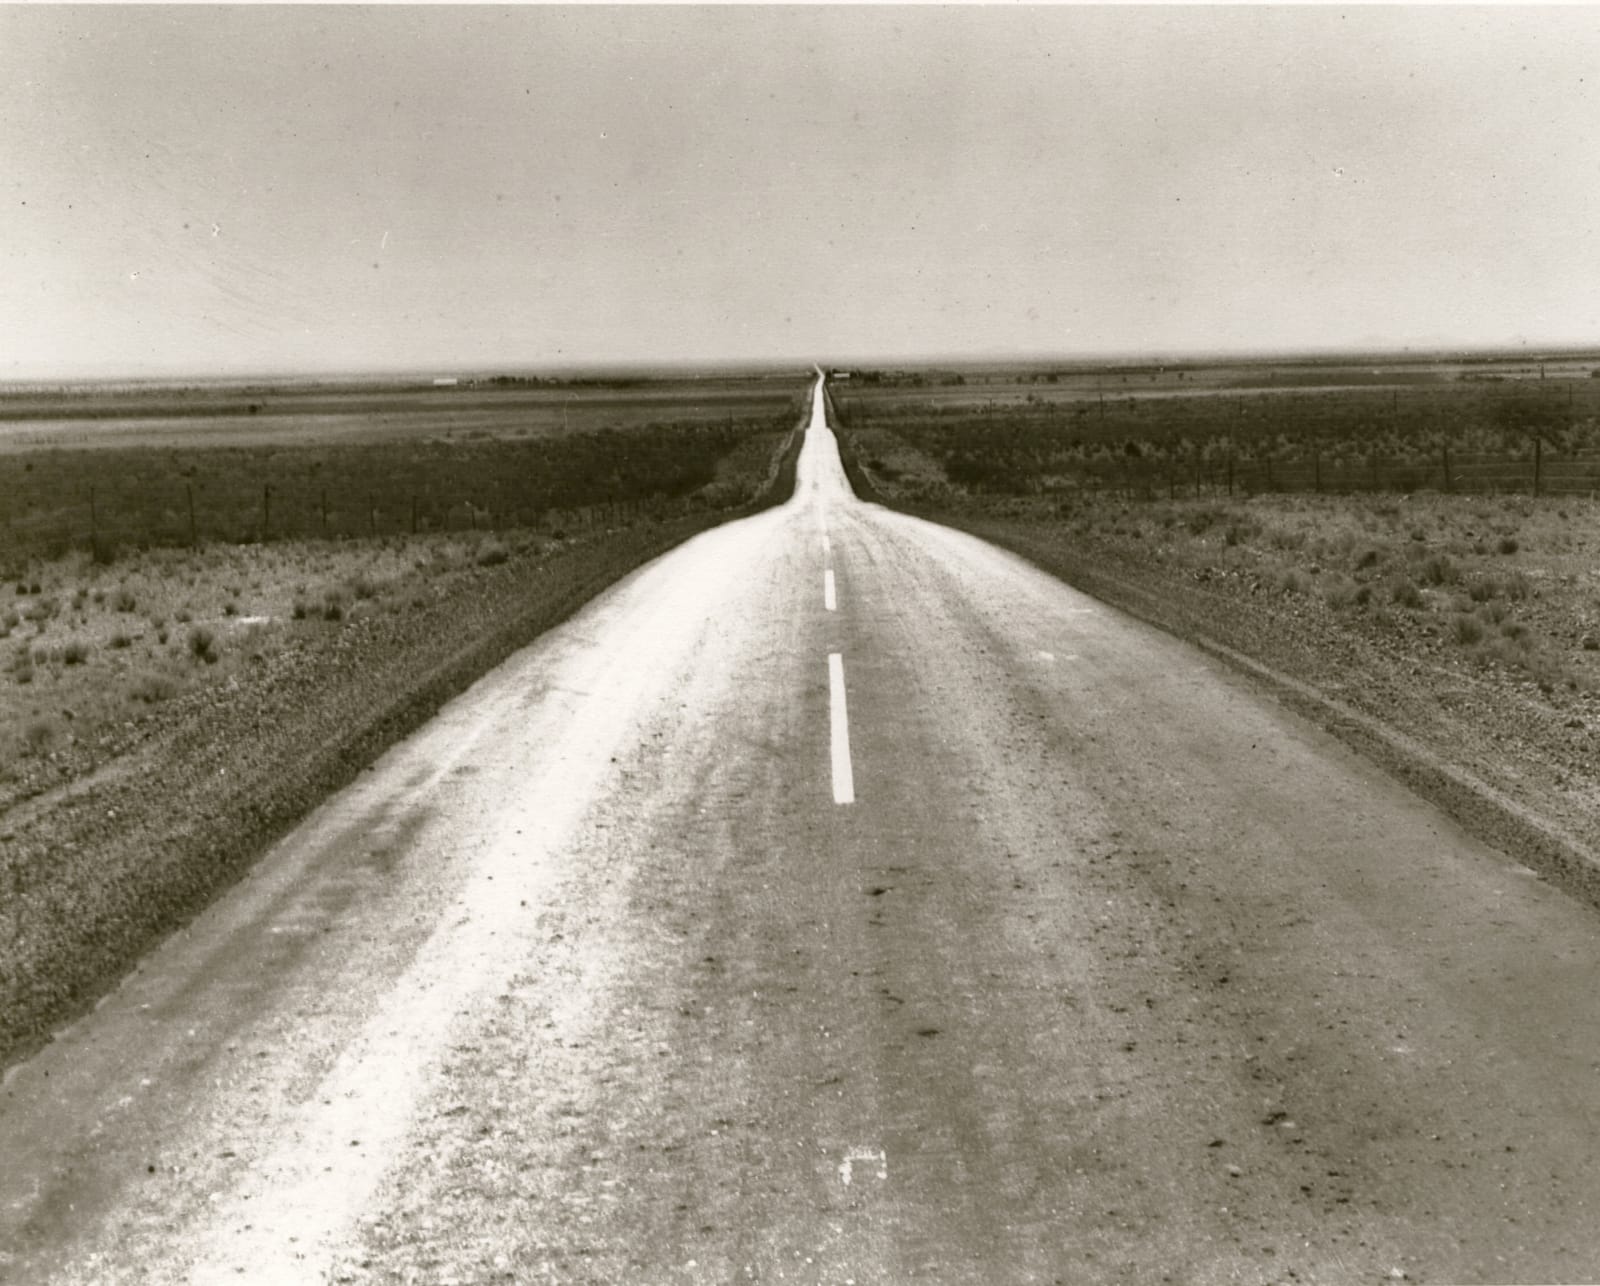 Dorothea Lange, The Road West, New Mexico, 1938